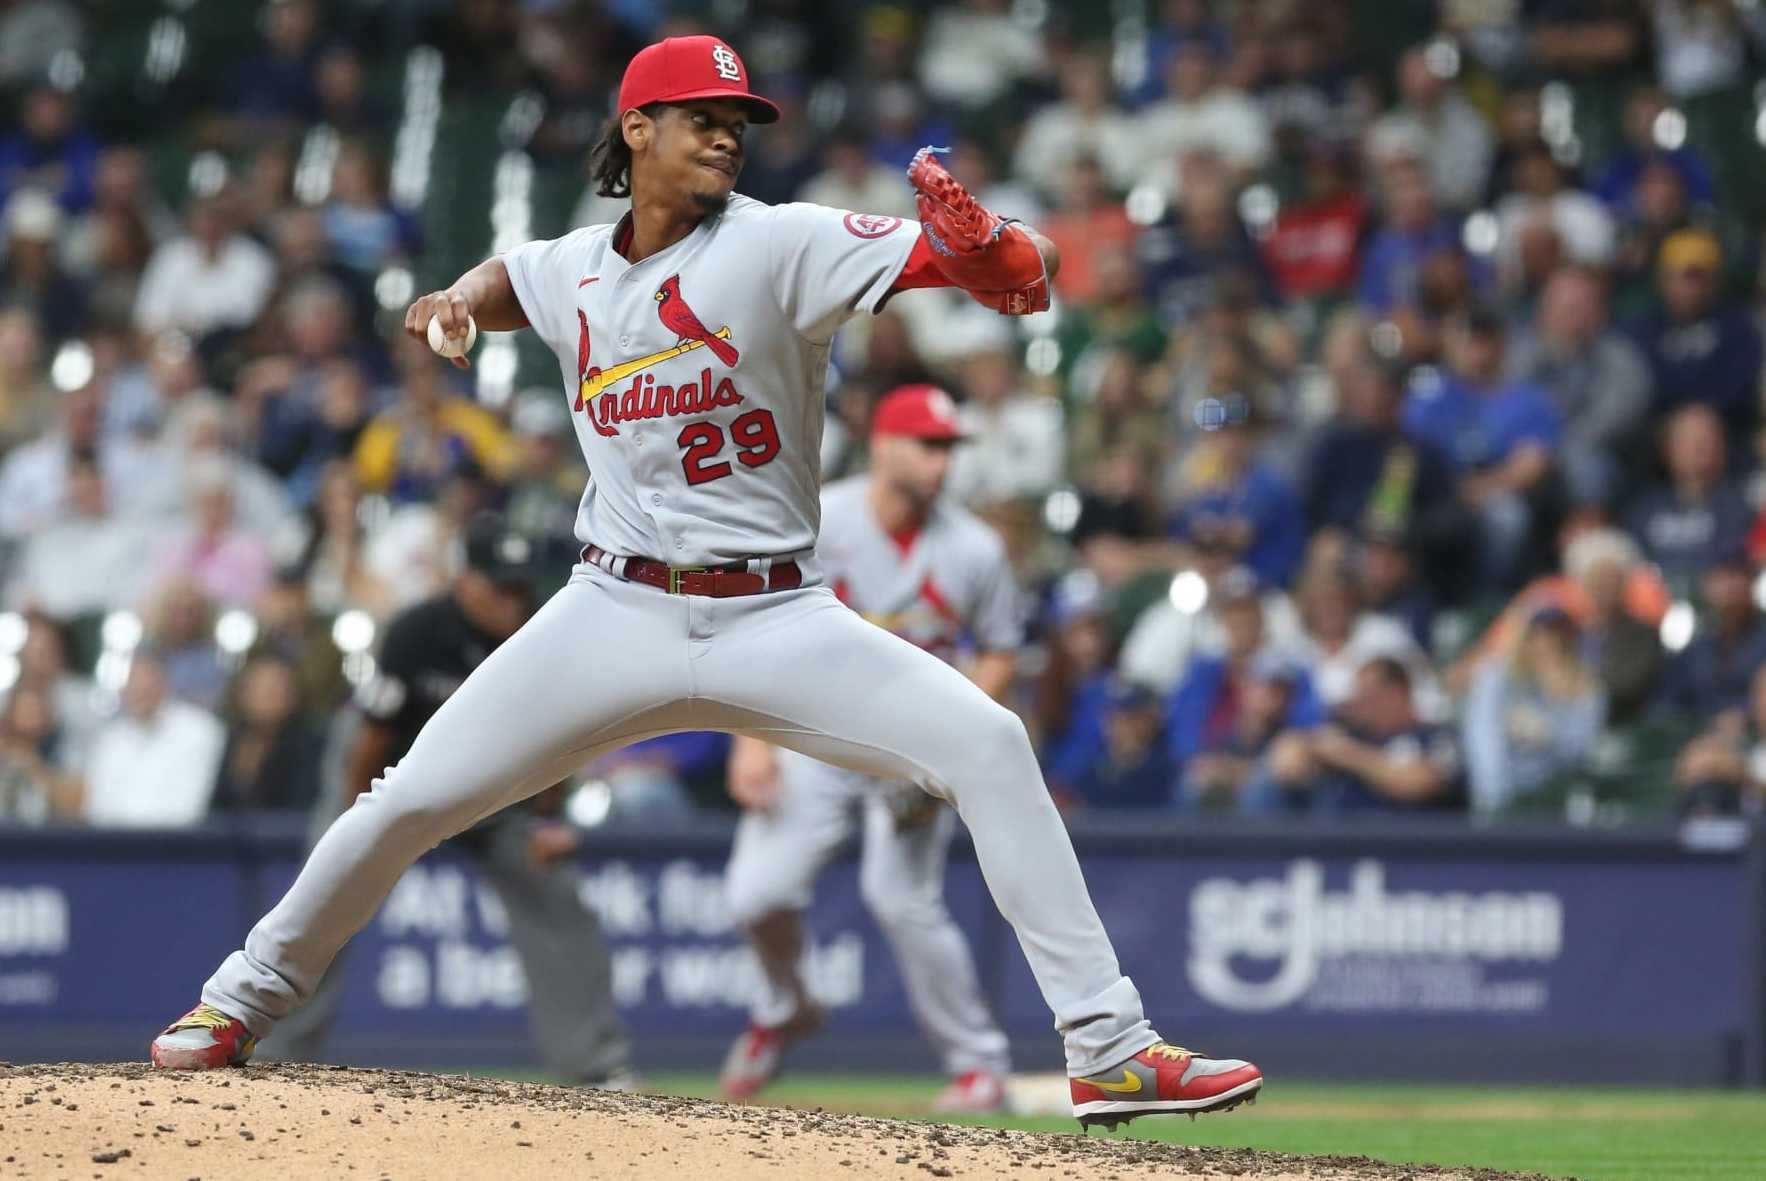 Cardinals decline to offer Alex Reyes a contract for next season